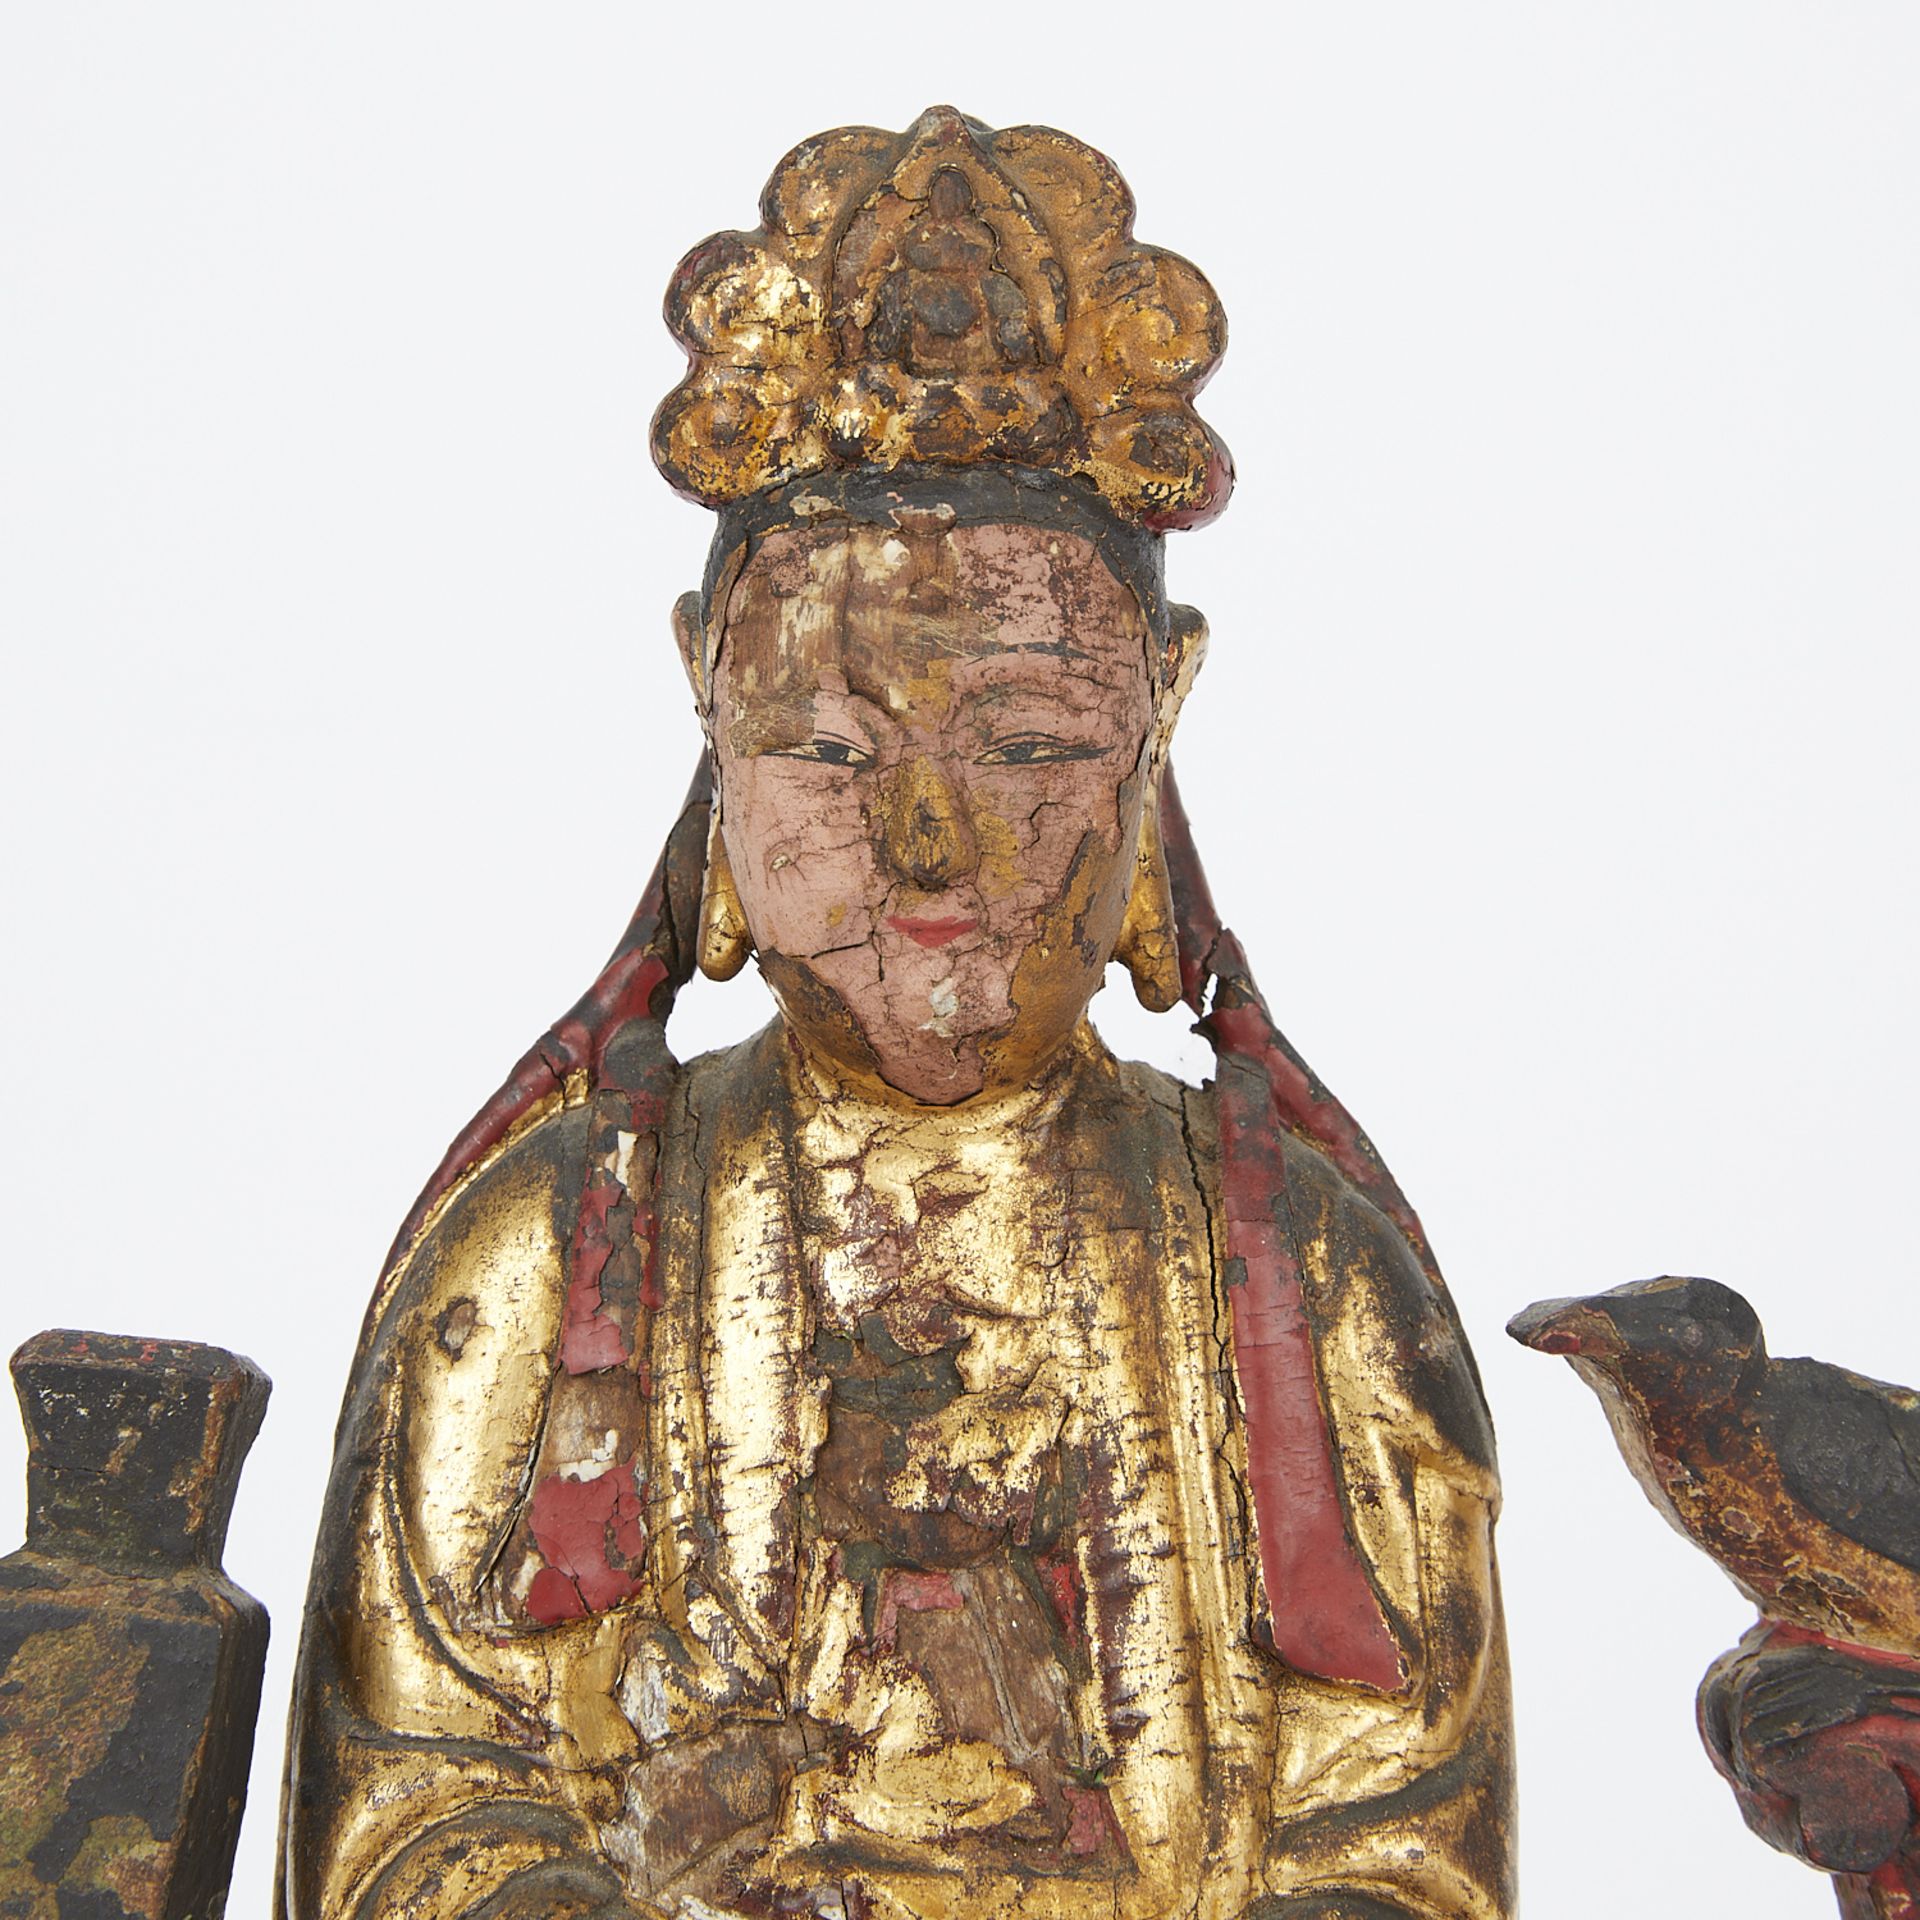 18th-19th c. Chinese Gilt Wooden Guanyin - Image 2 of 9